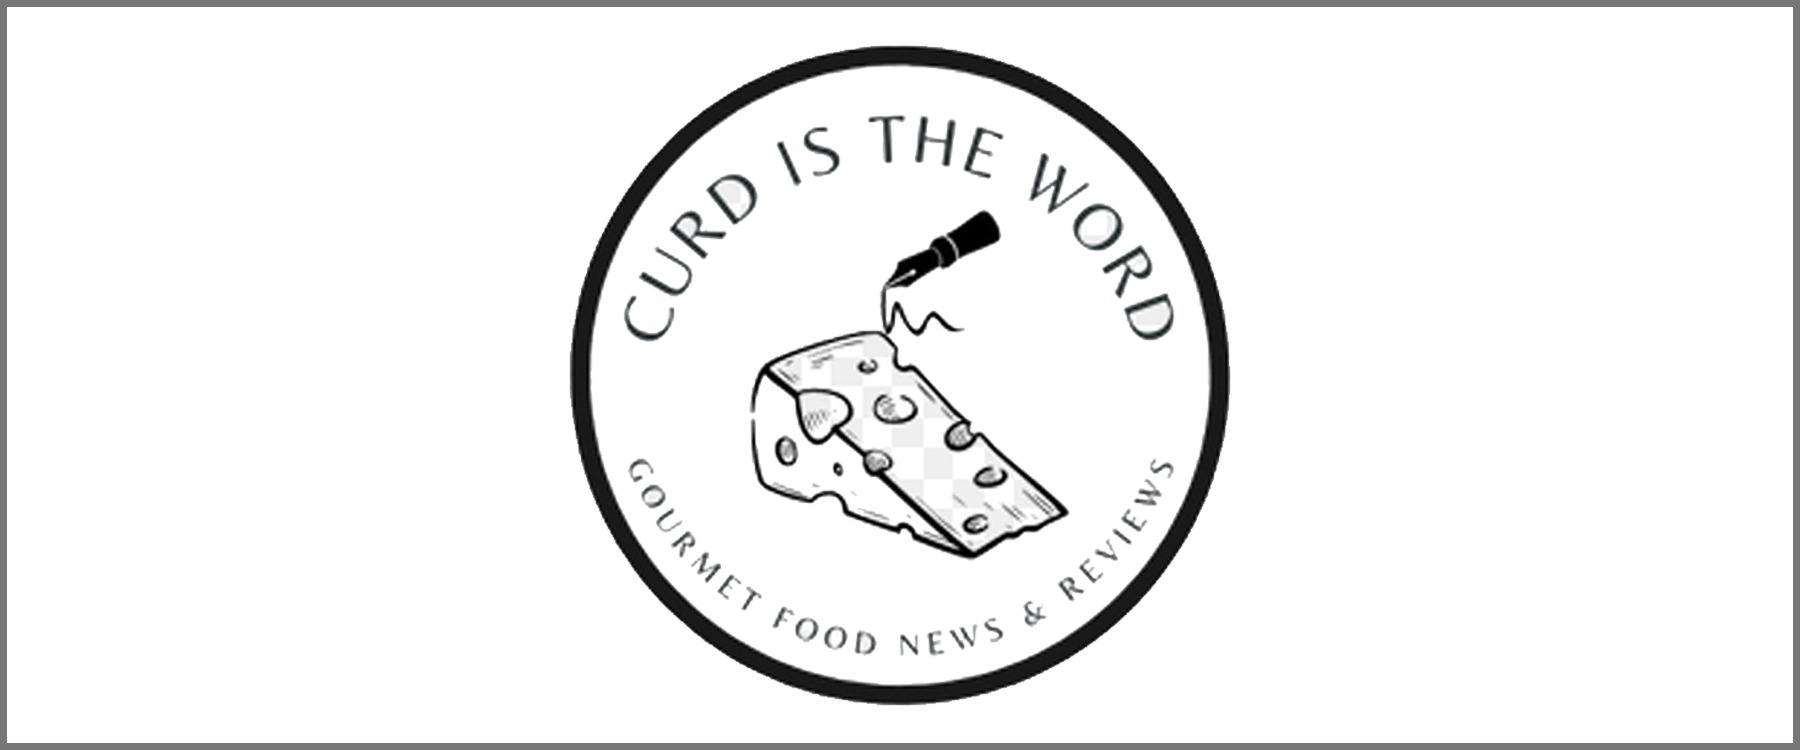 Curd-is-the-word (2)